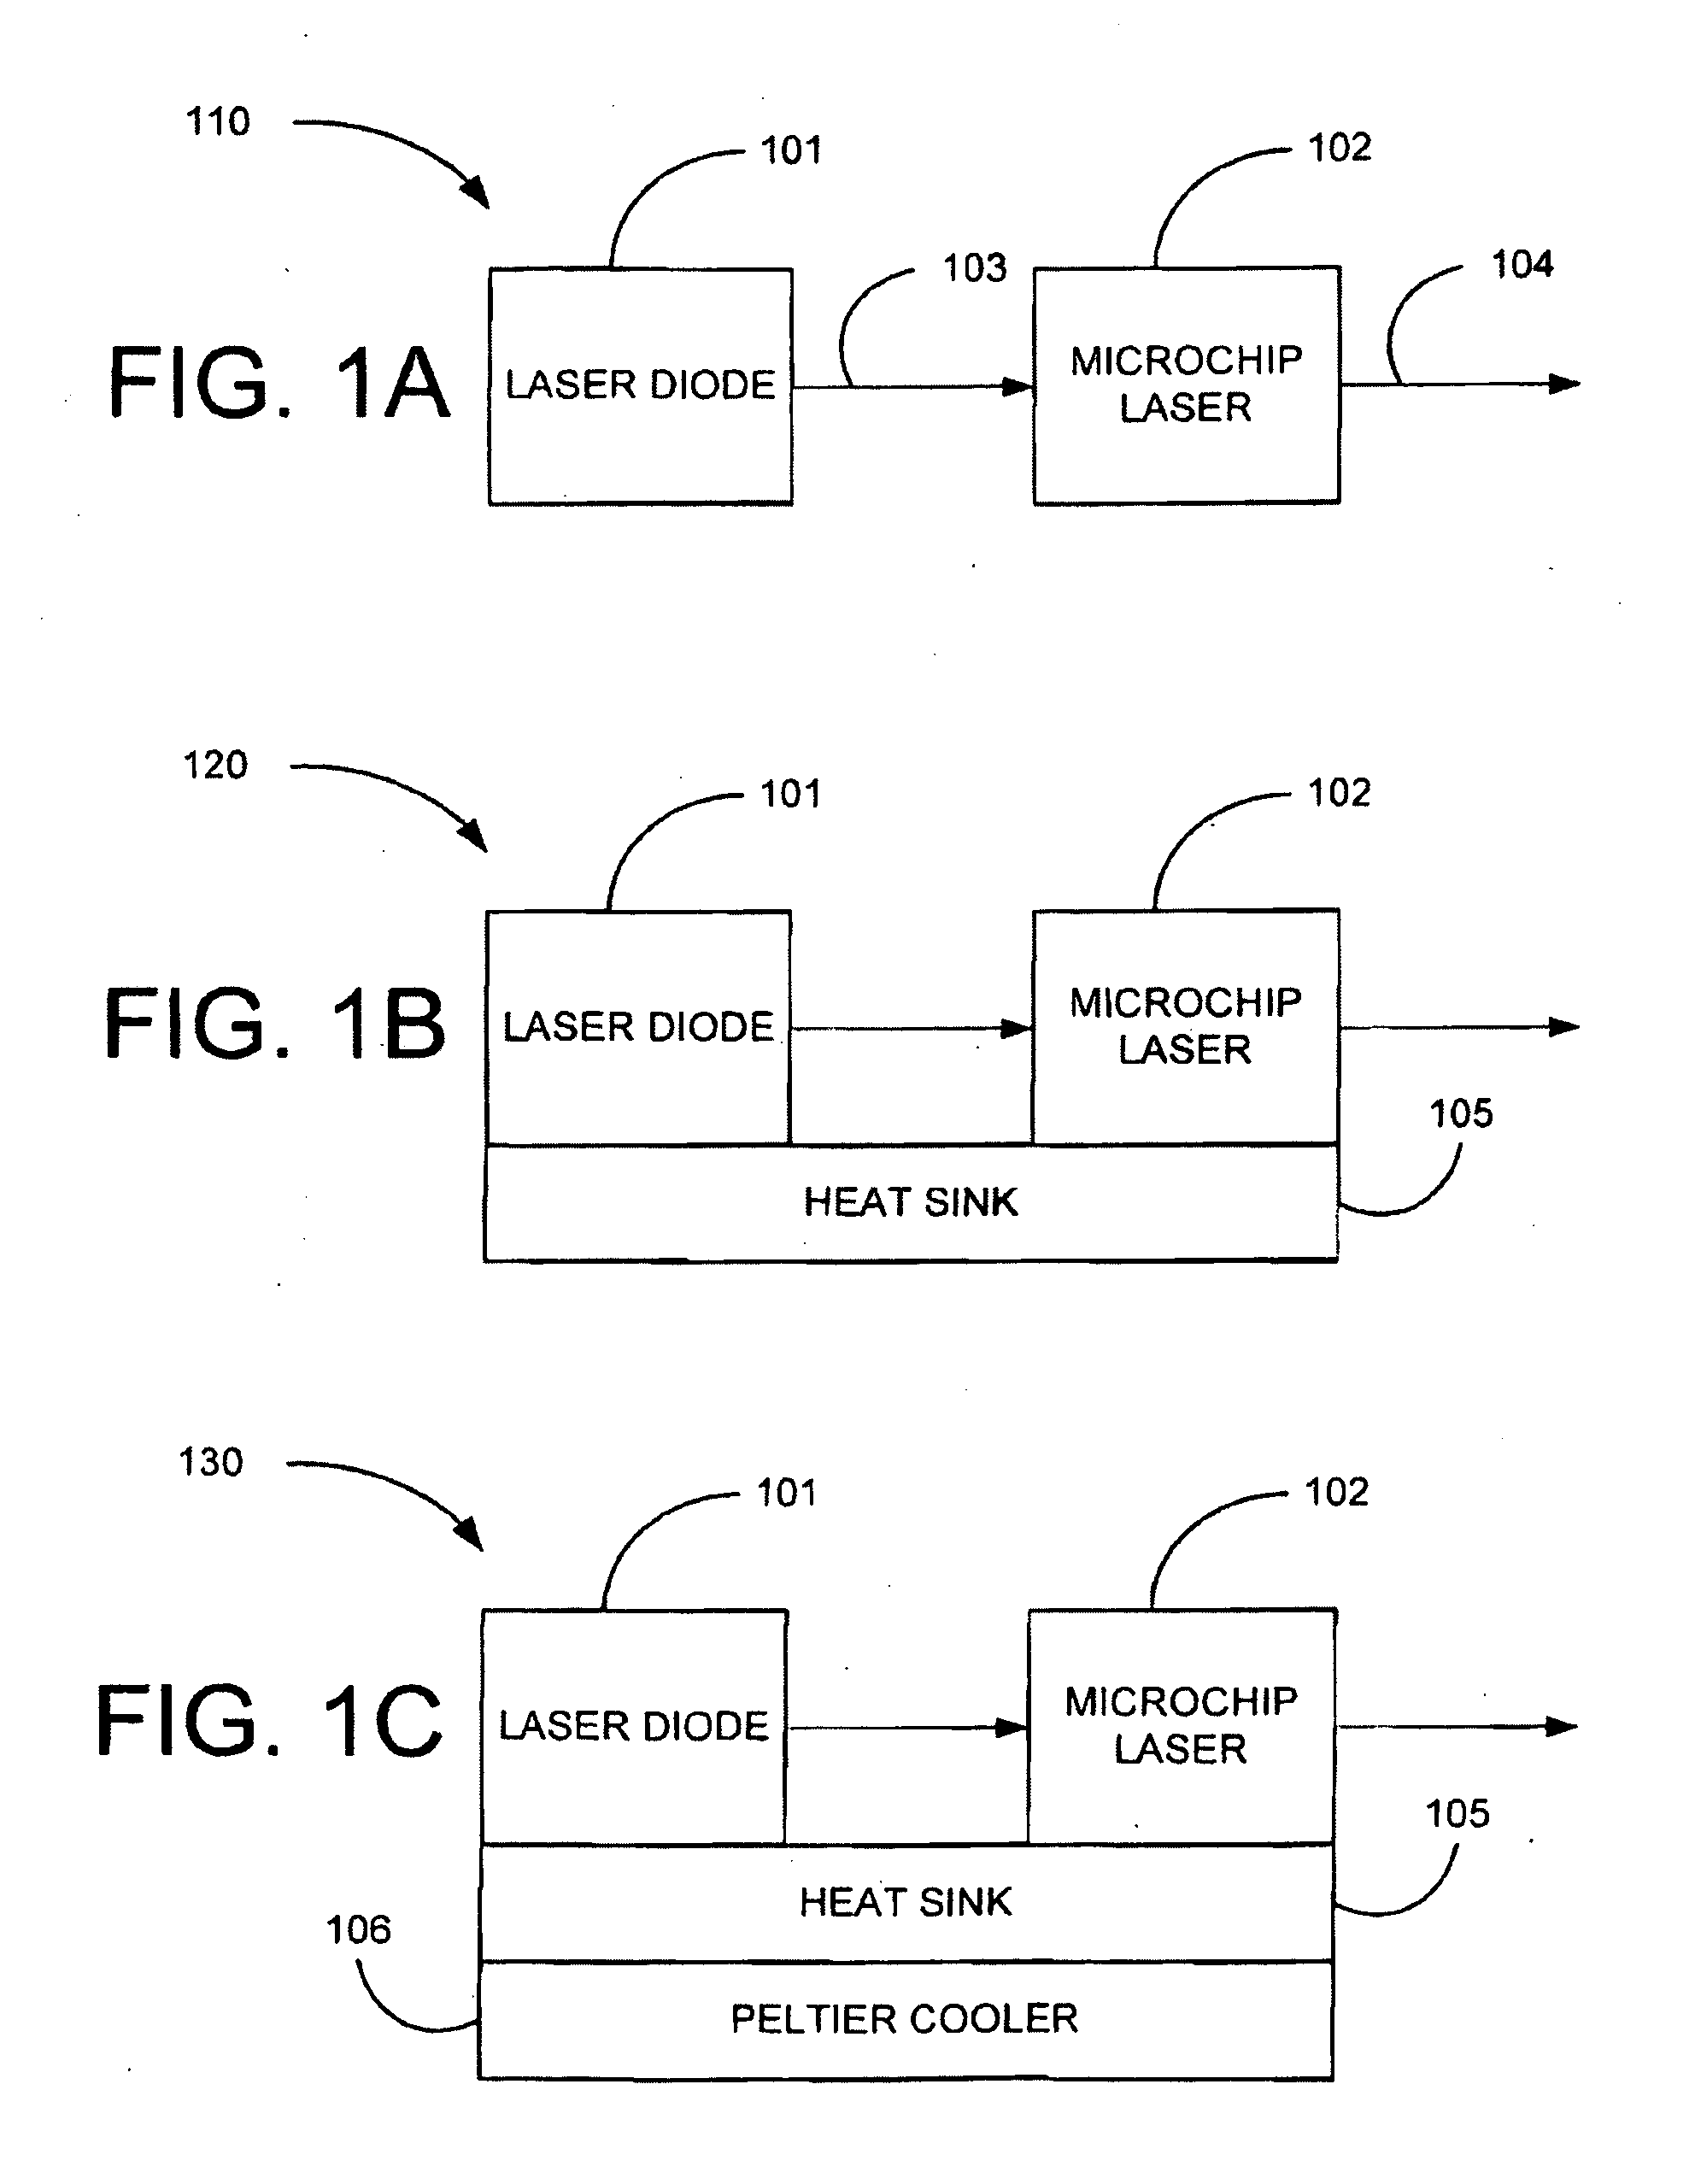 Pumped semiconductor laser systems and methods